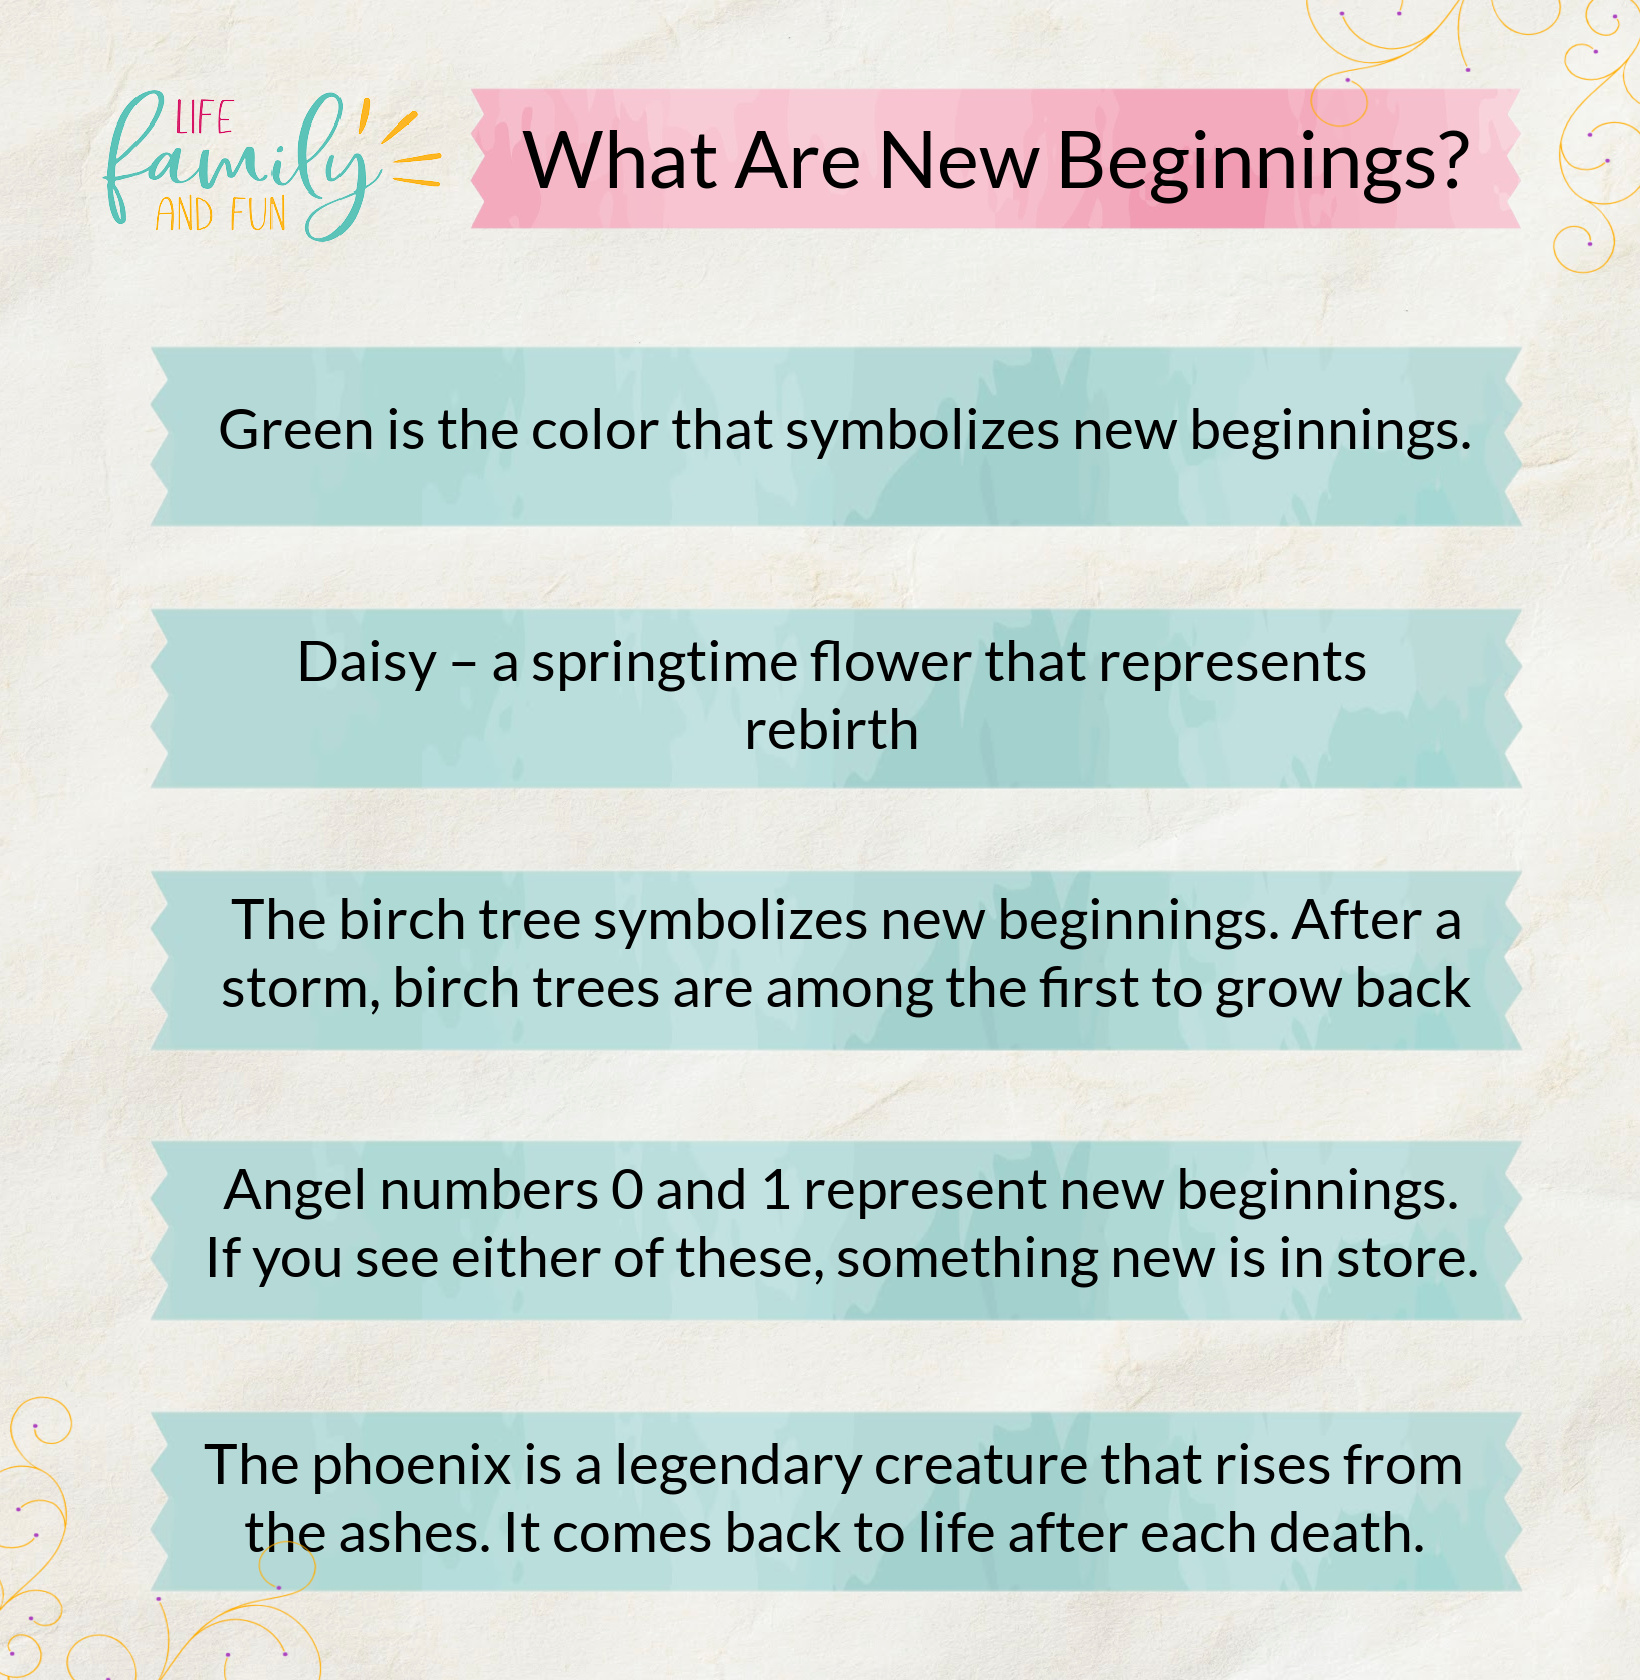 What Are New Beginnings?